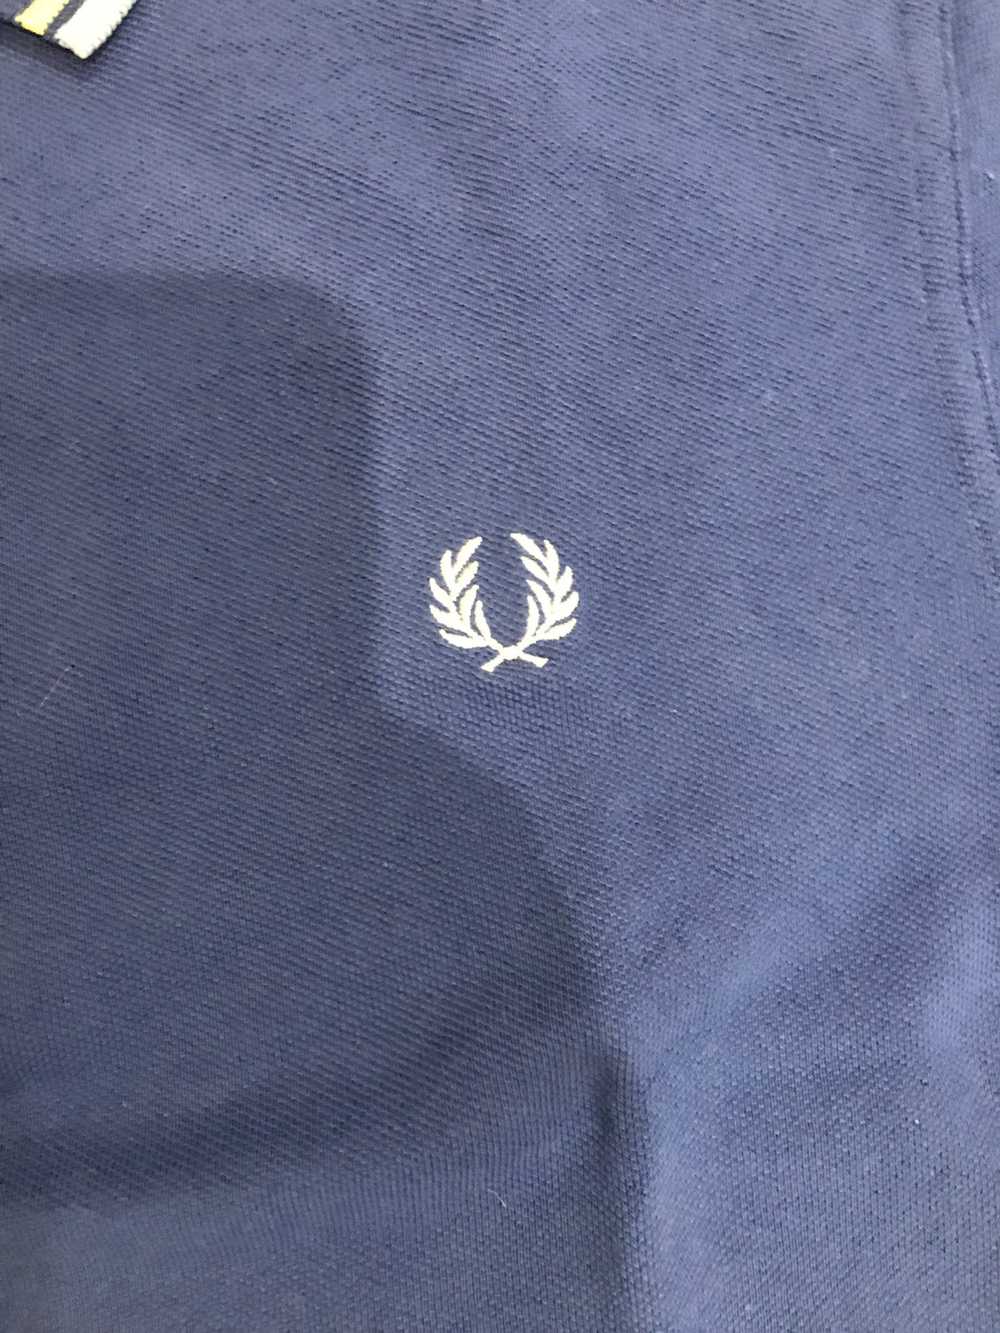 Fred Perry M1200 Polo Shirt - image 3